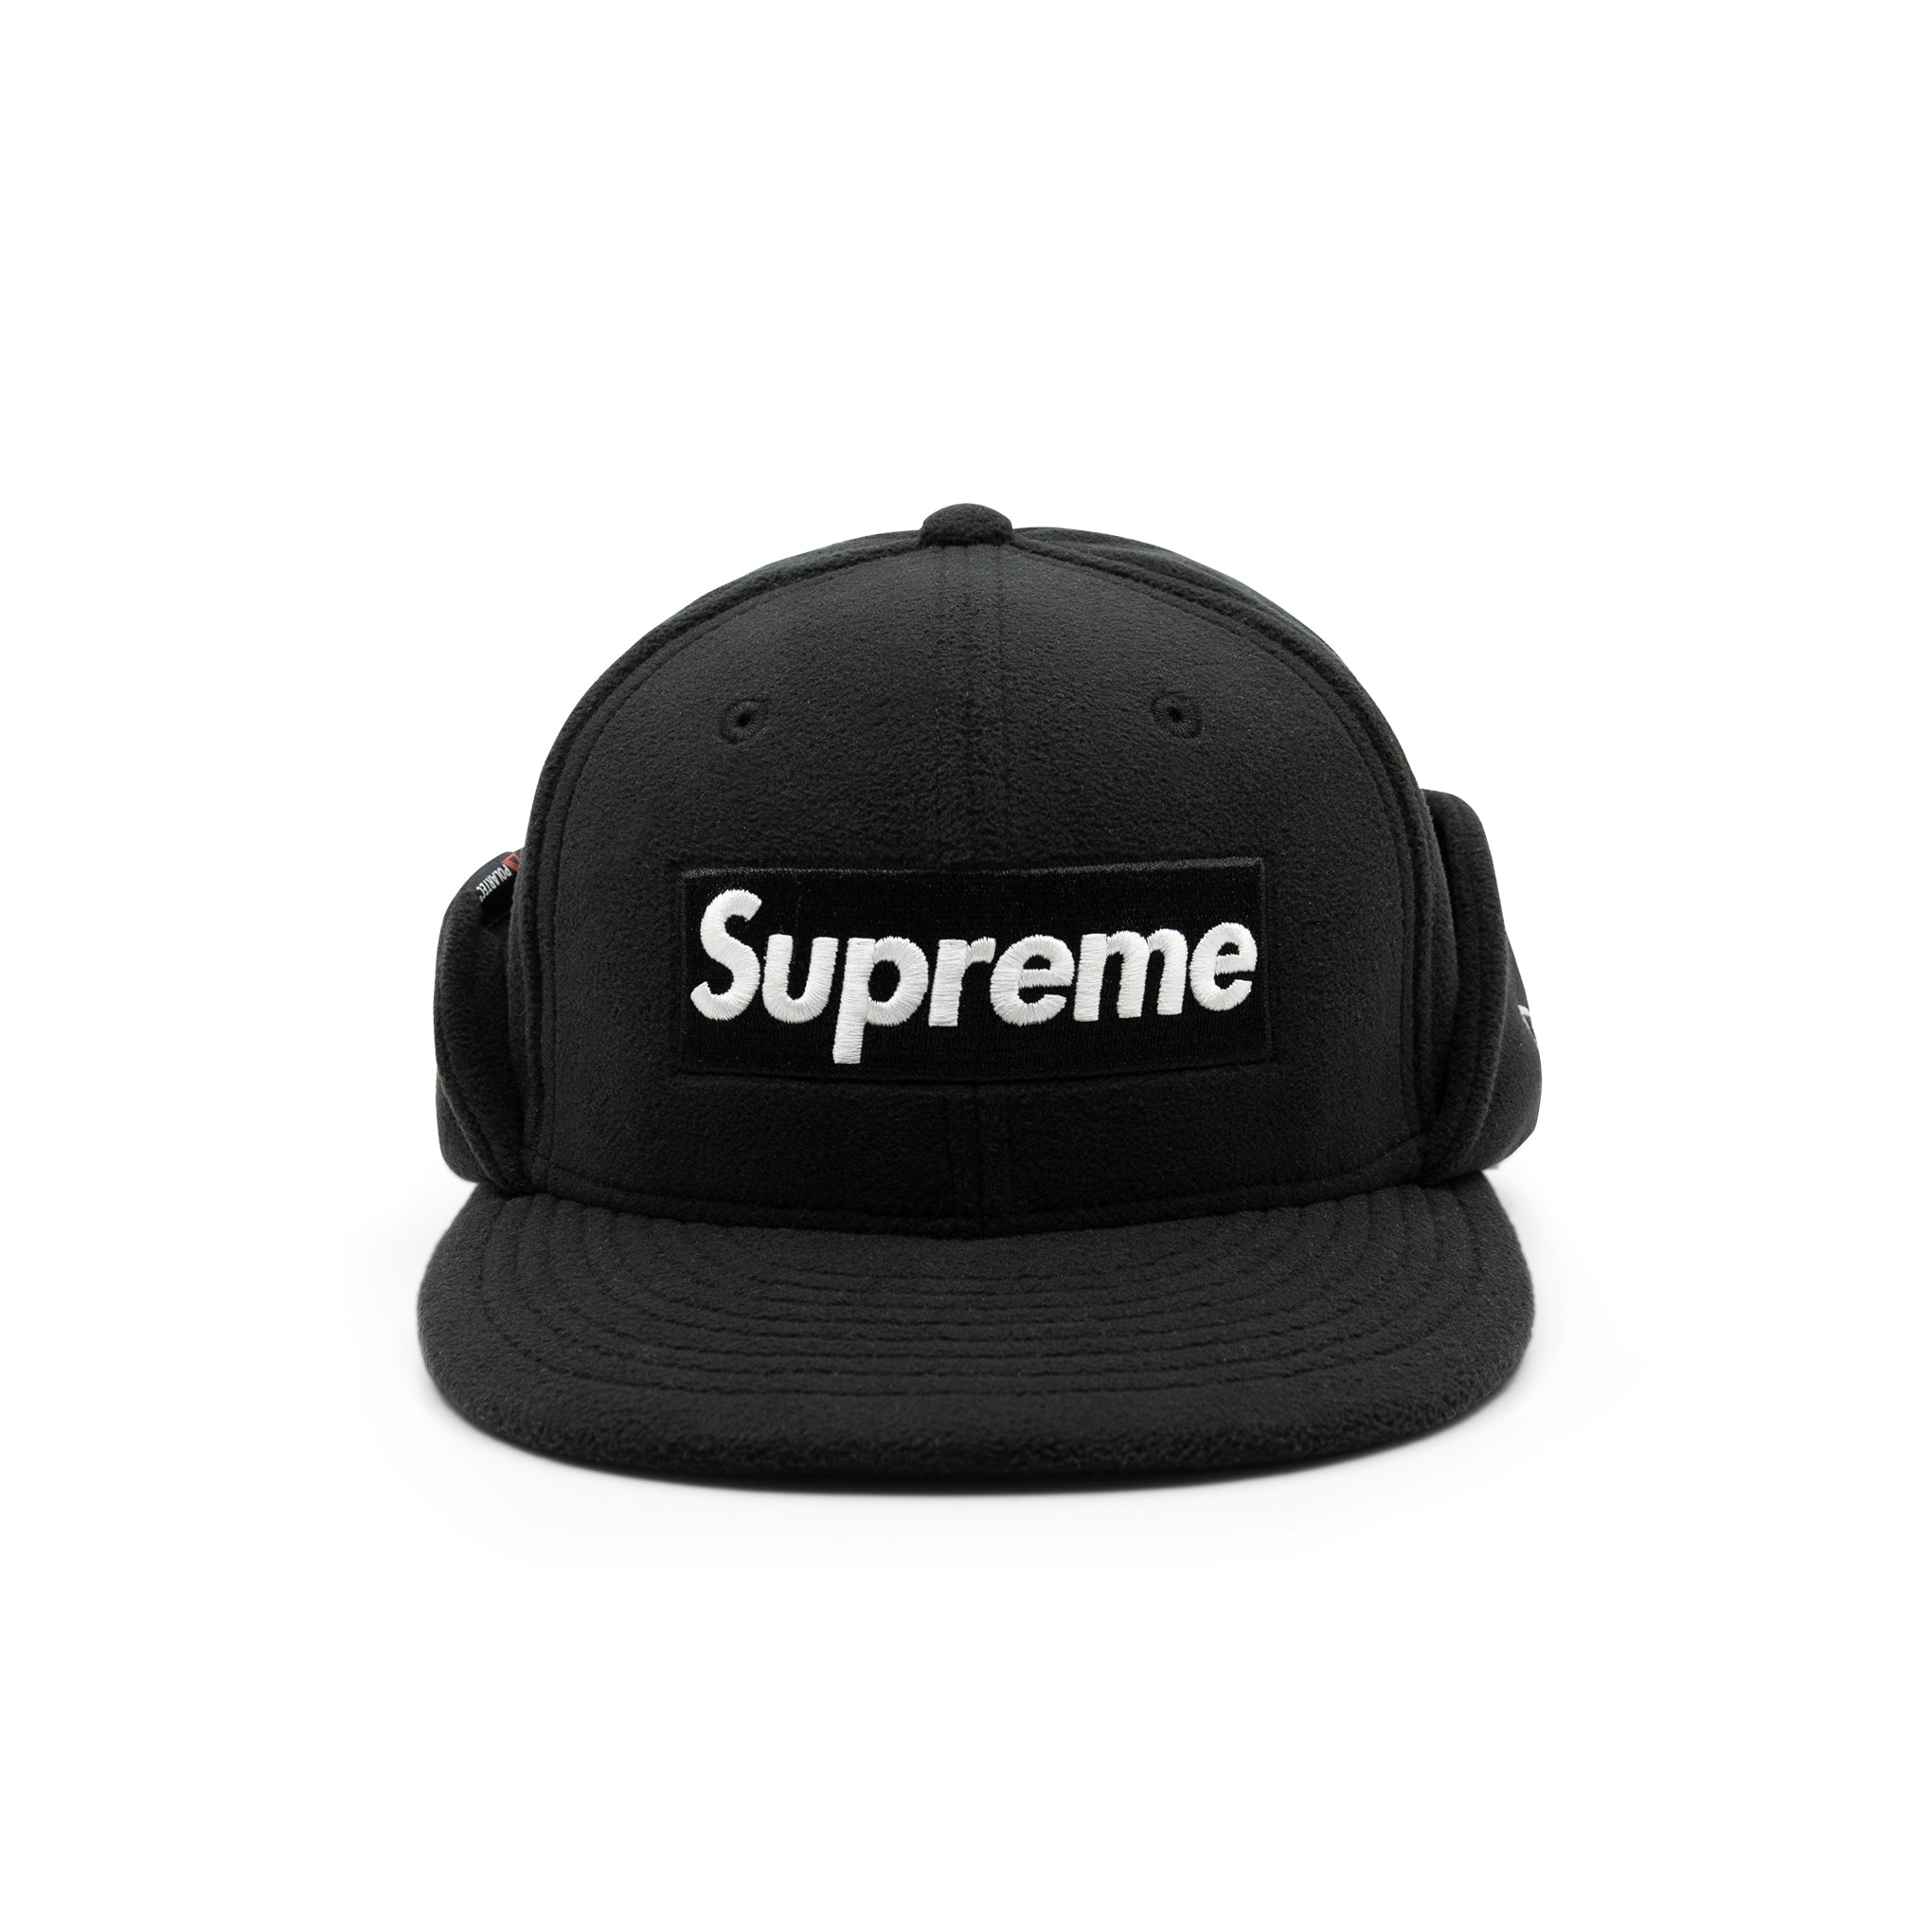 SUPREME NEW ERA FLAPPED FITTED BLACK